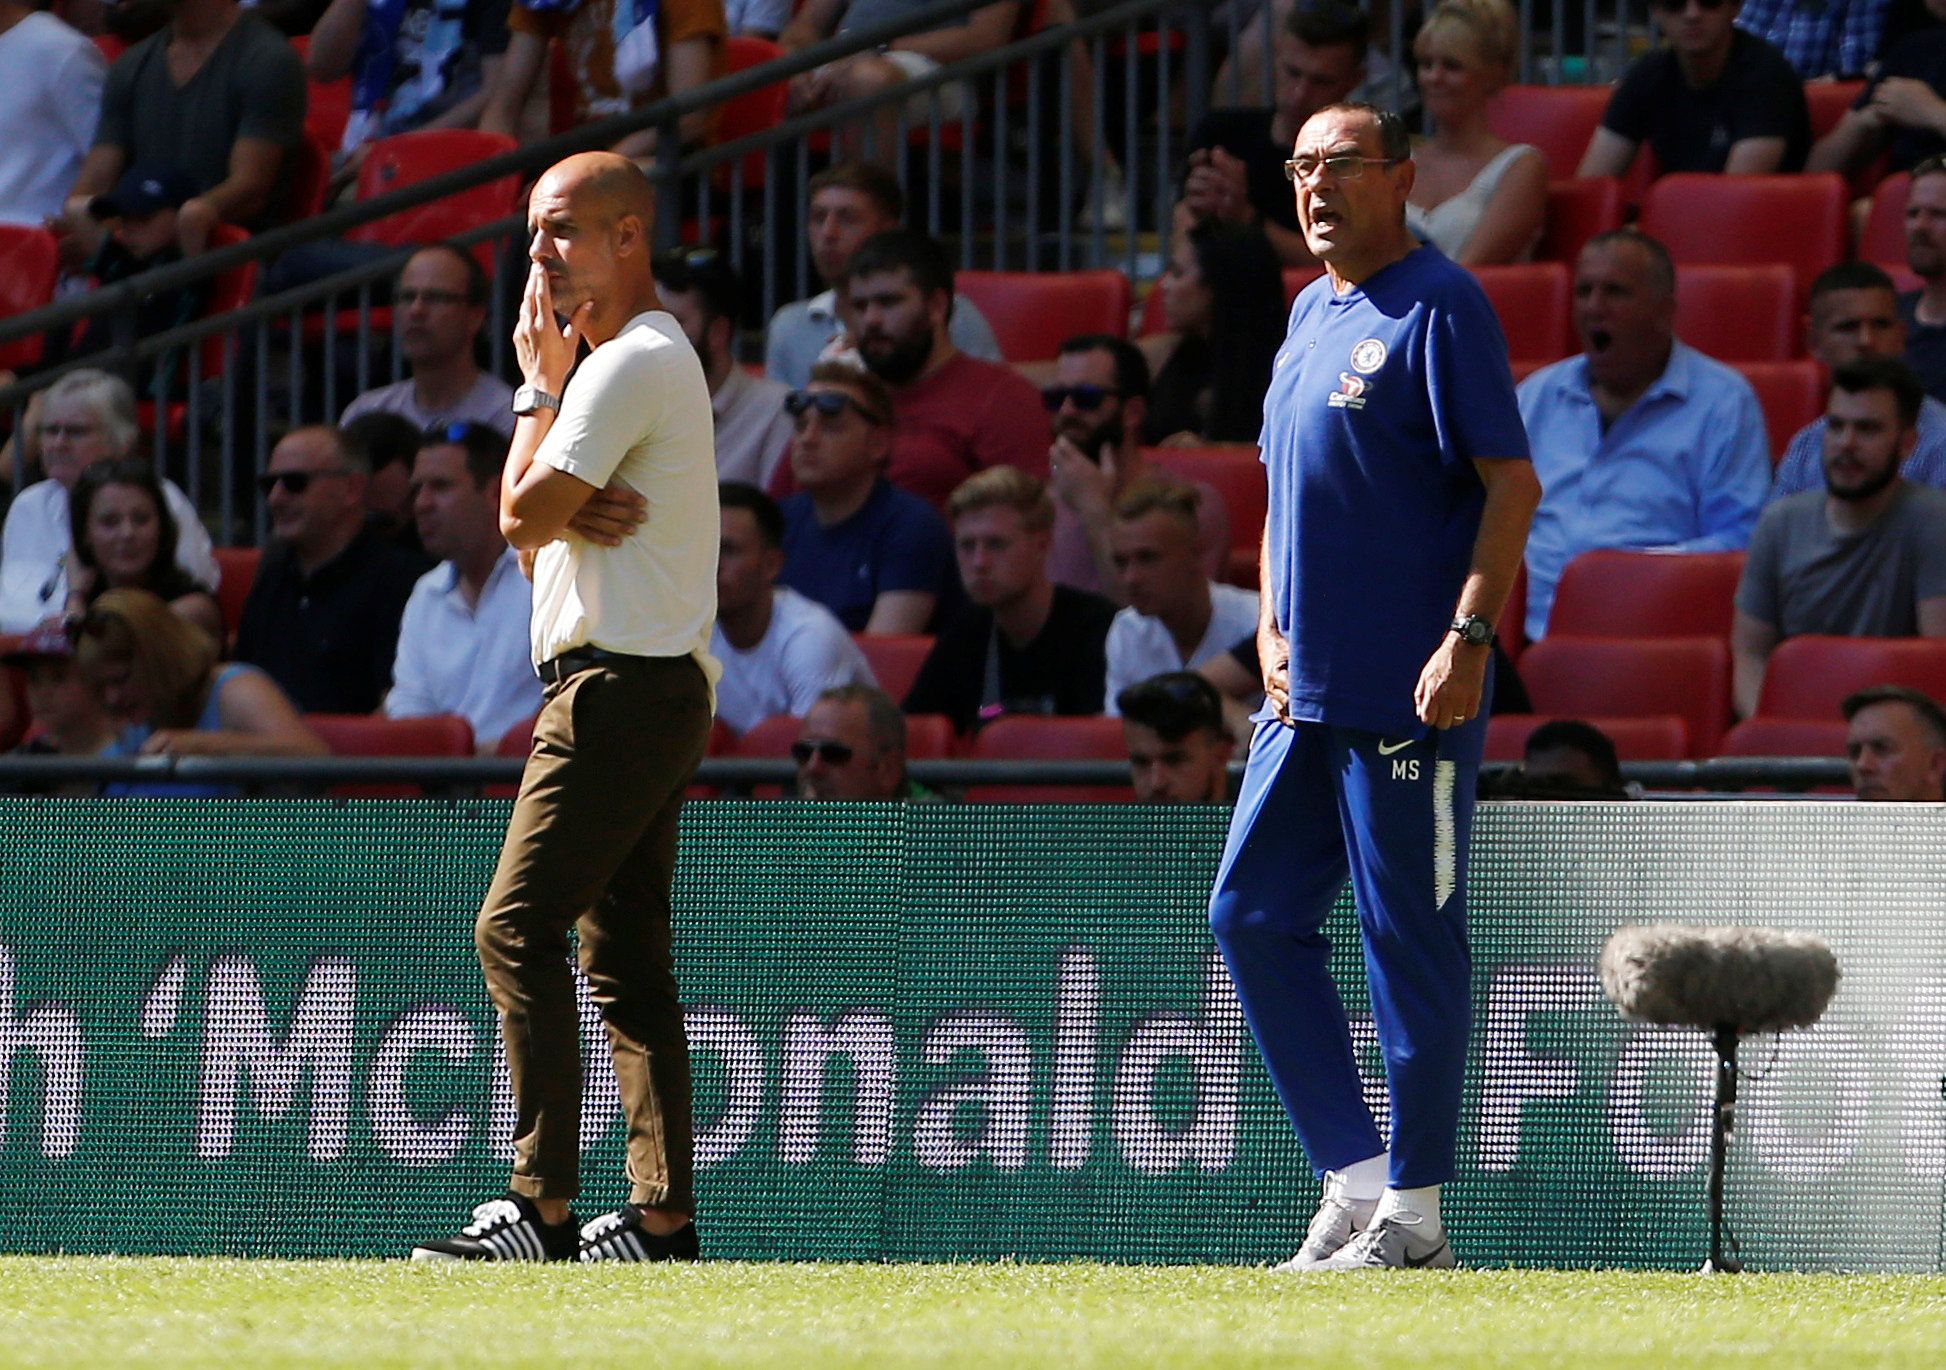 Chelsea manager Maurizio Sarri reacts as Manchester City manager Pep Guardiola looks on